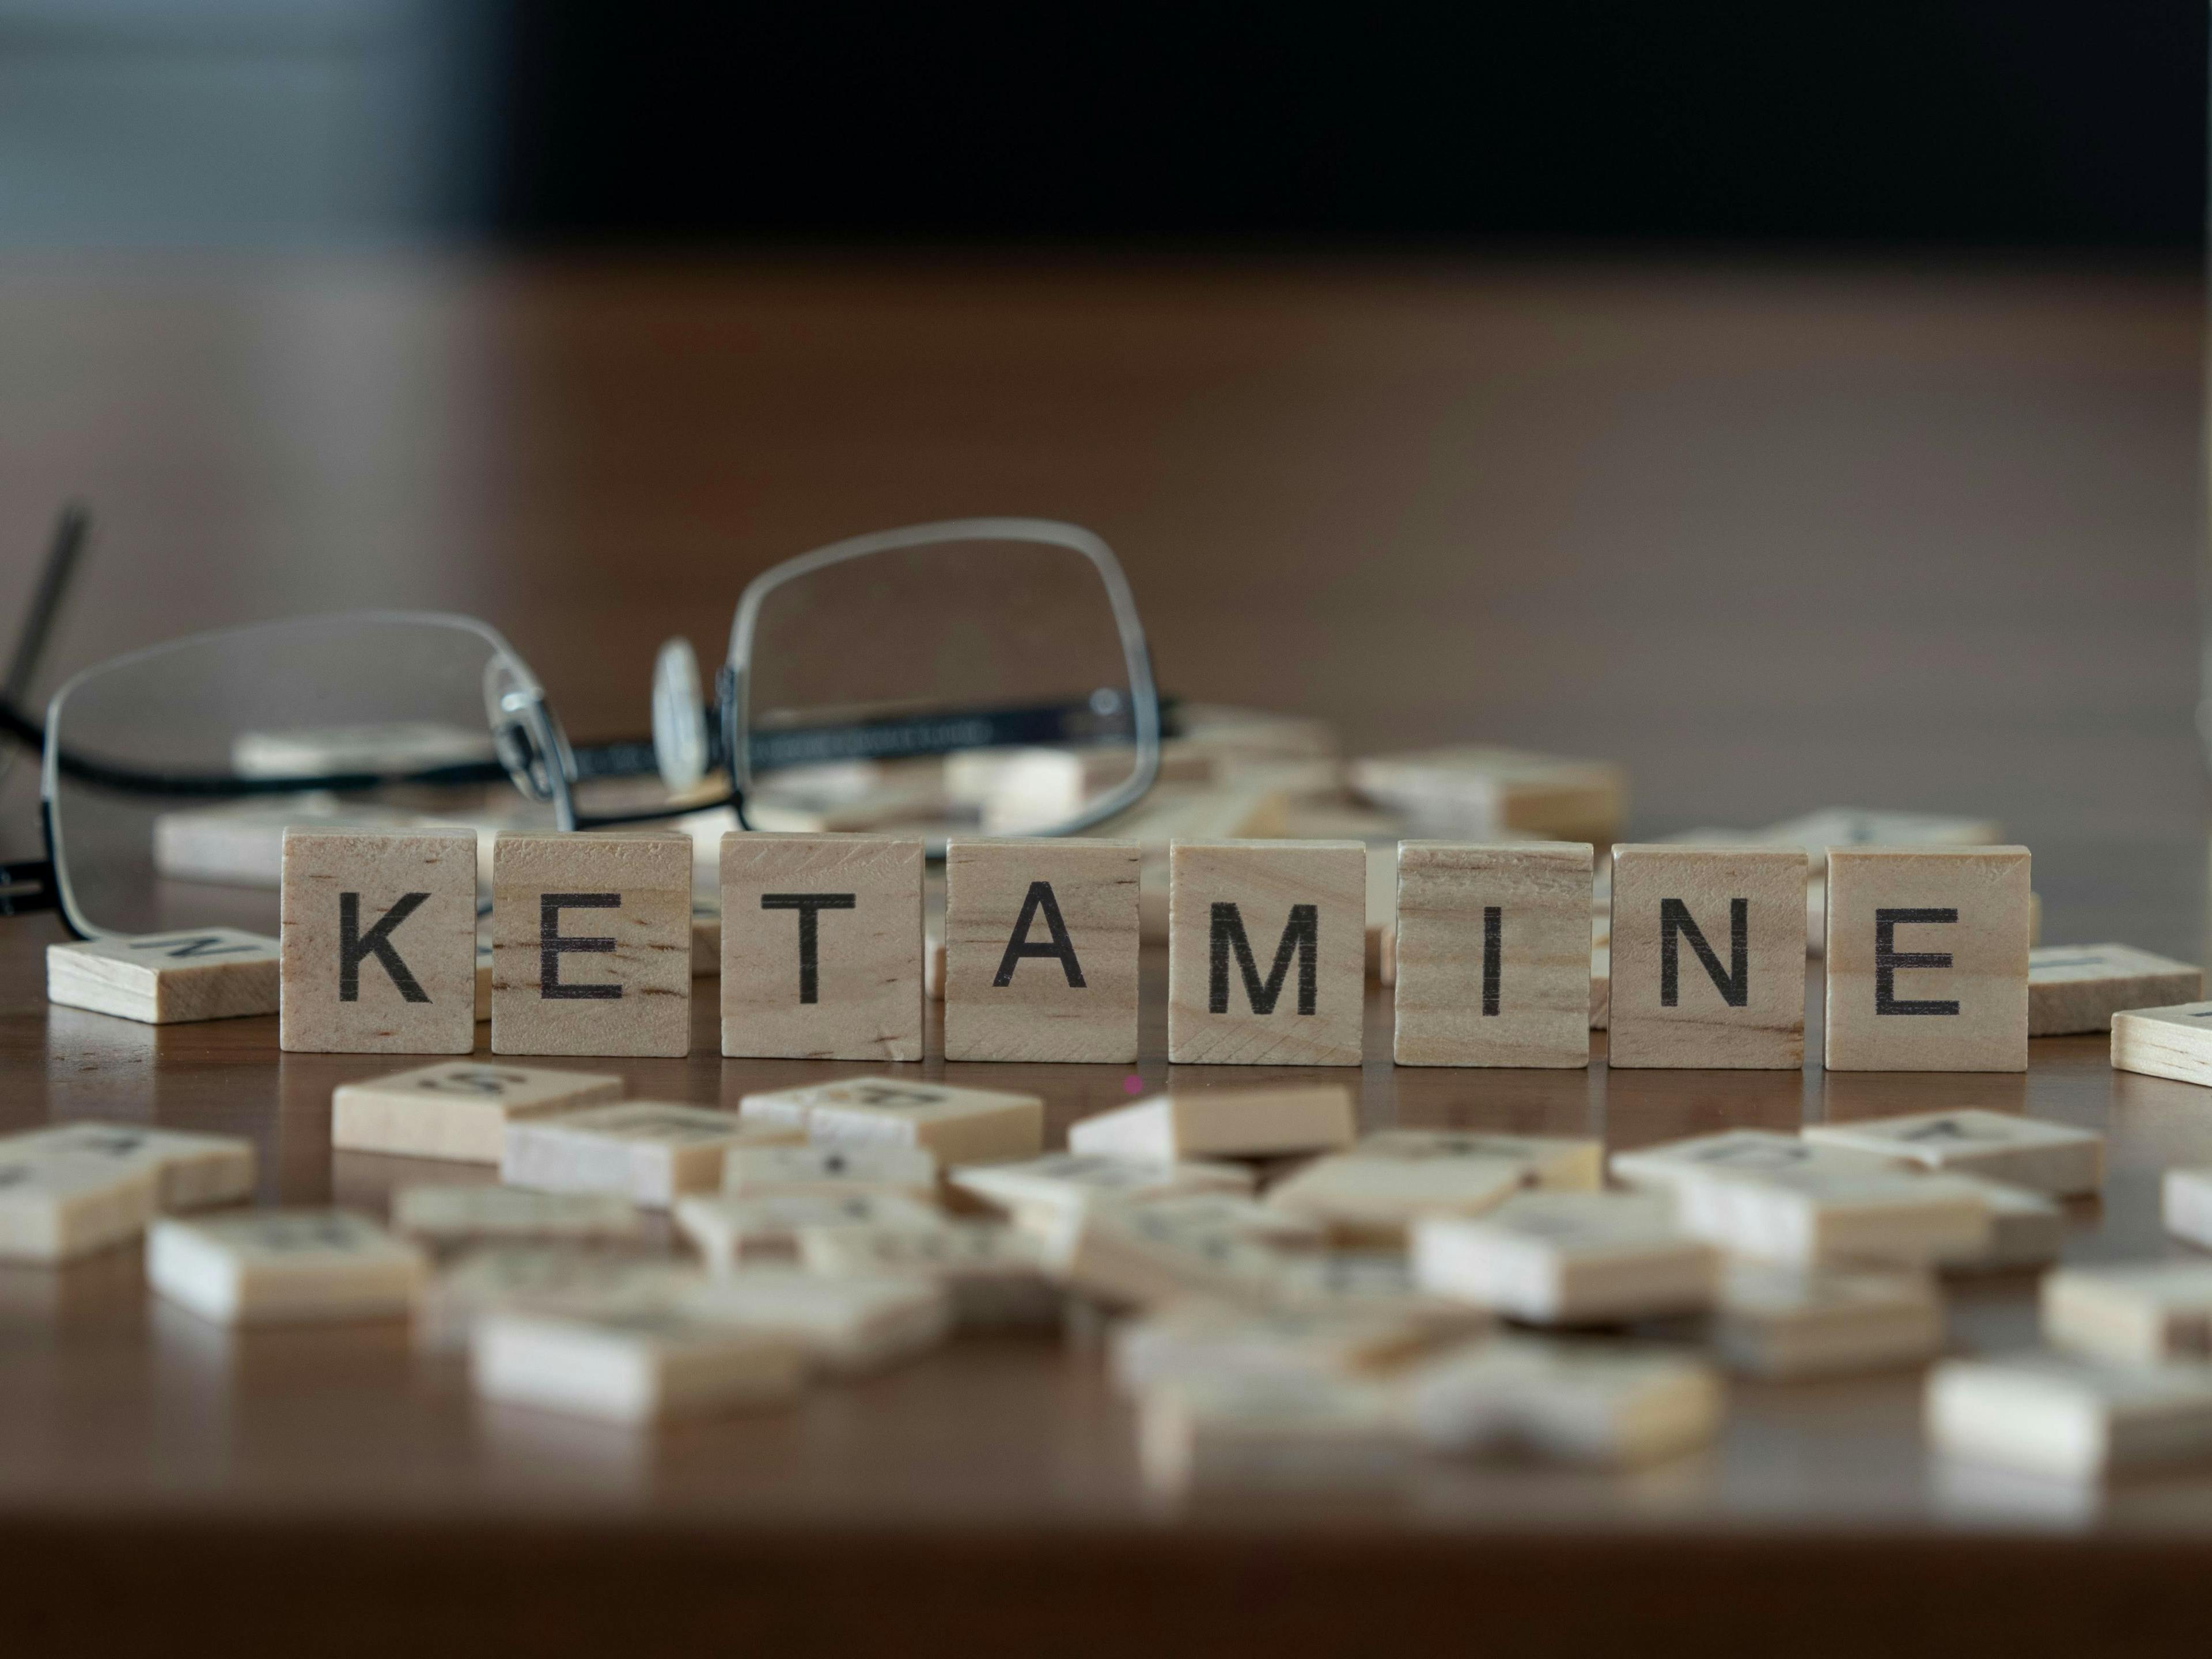 Over Half of At-Home Ketamine Users Misuse the Treatment